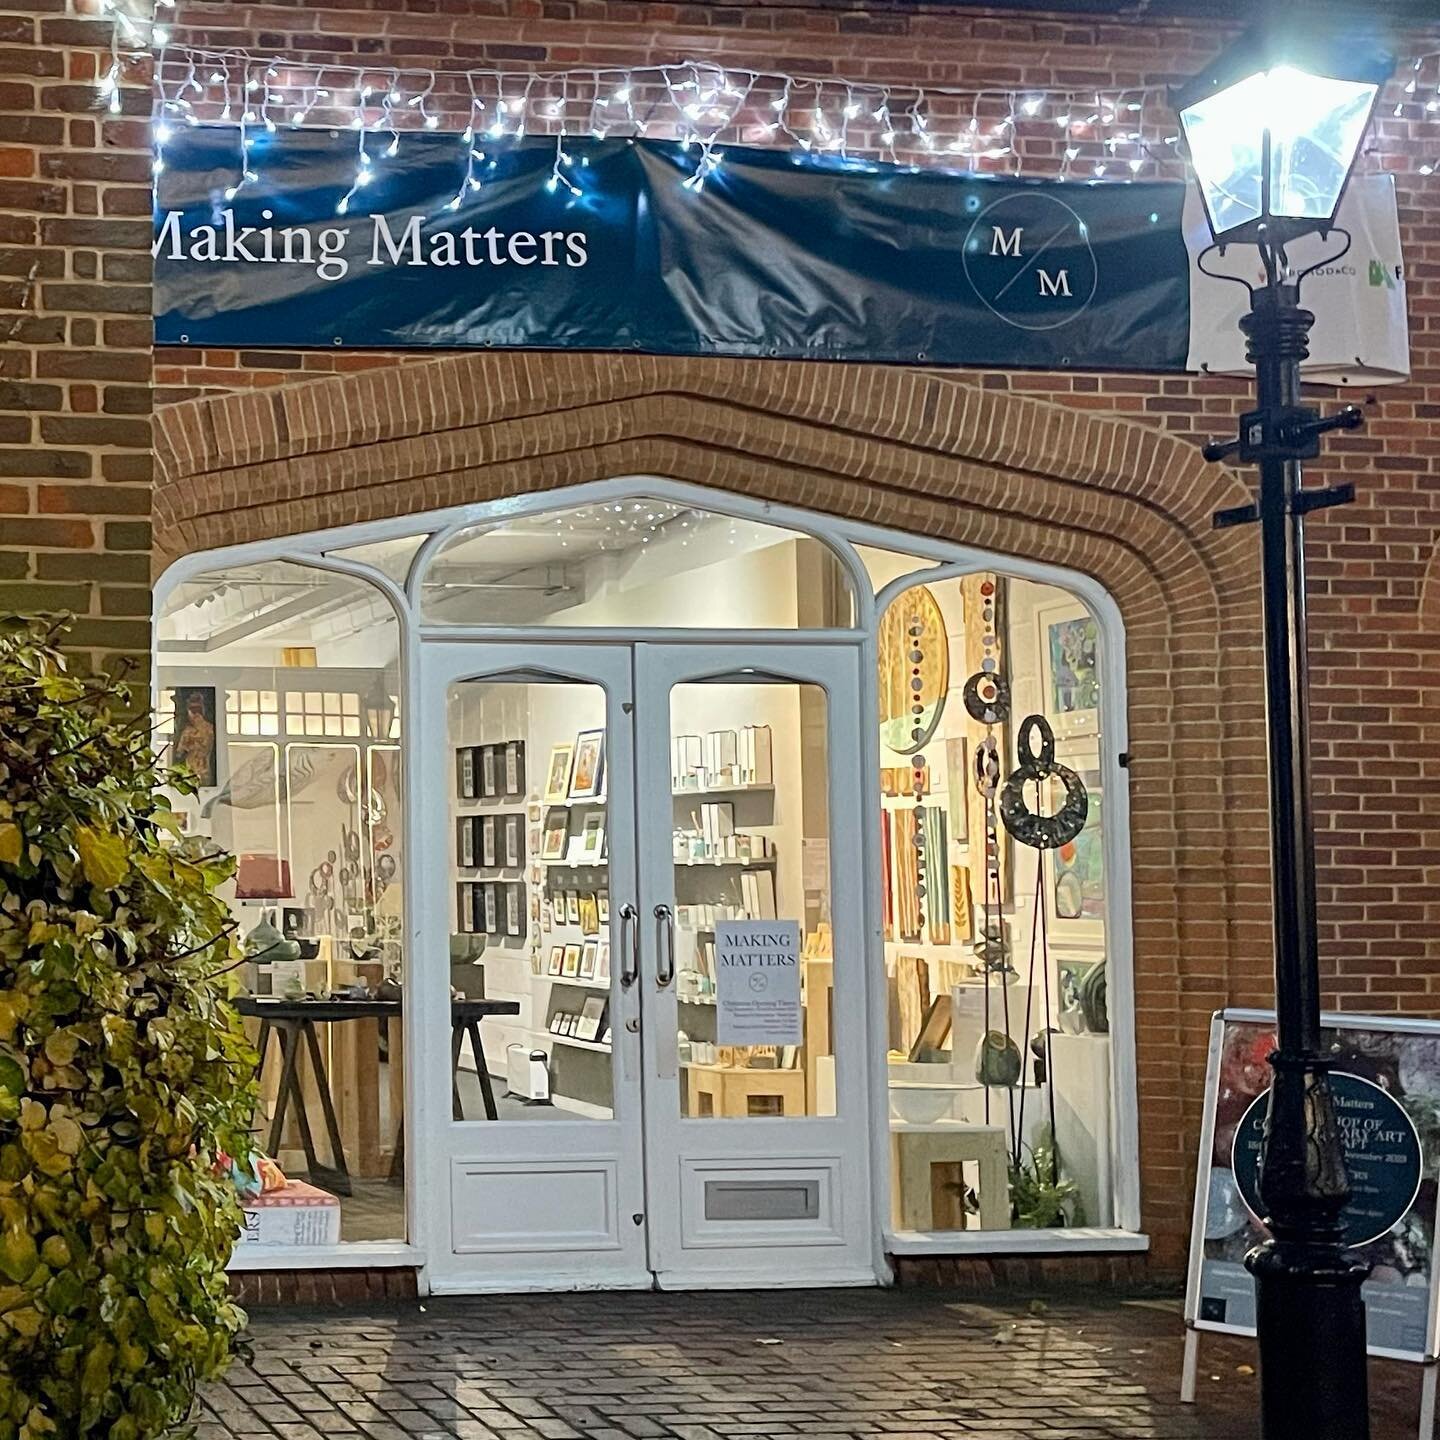 Amongst the preparations for open studios (more of that soon) I&rsquo;m taking part in the Making Matters pop-up shop in Farnham&rsquo;s Lion and Lamb Yard.  Open until 23rd December it features work from a host of brilliant artists and makers includ